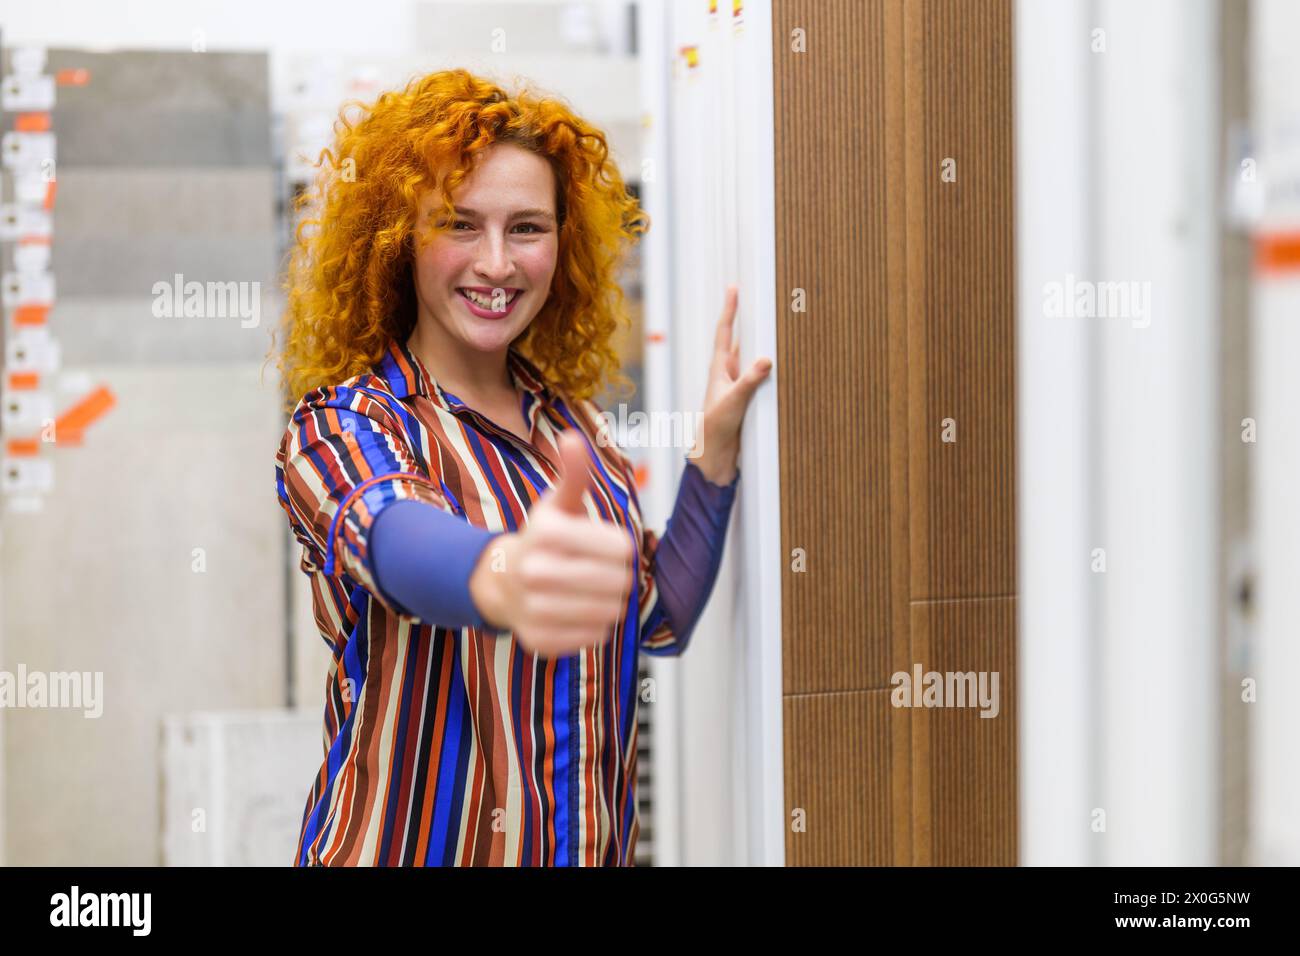 Portrait of salesperson in bathroom store. Happy redhead woman works in bath store. Sales occupation. Stock Photo